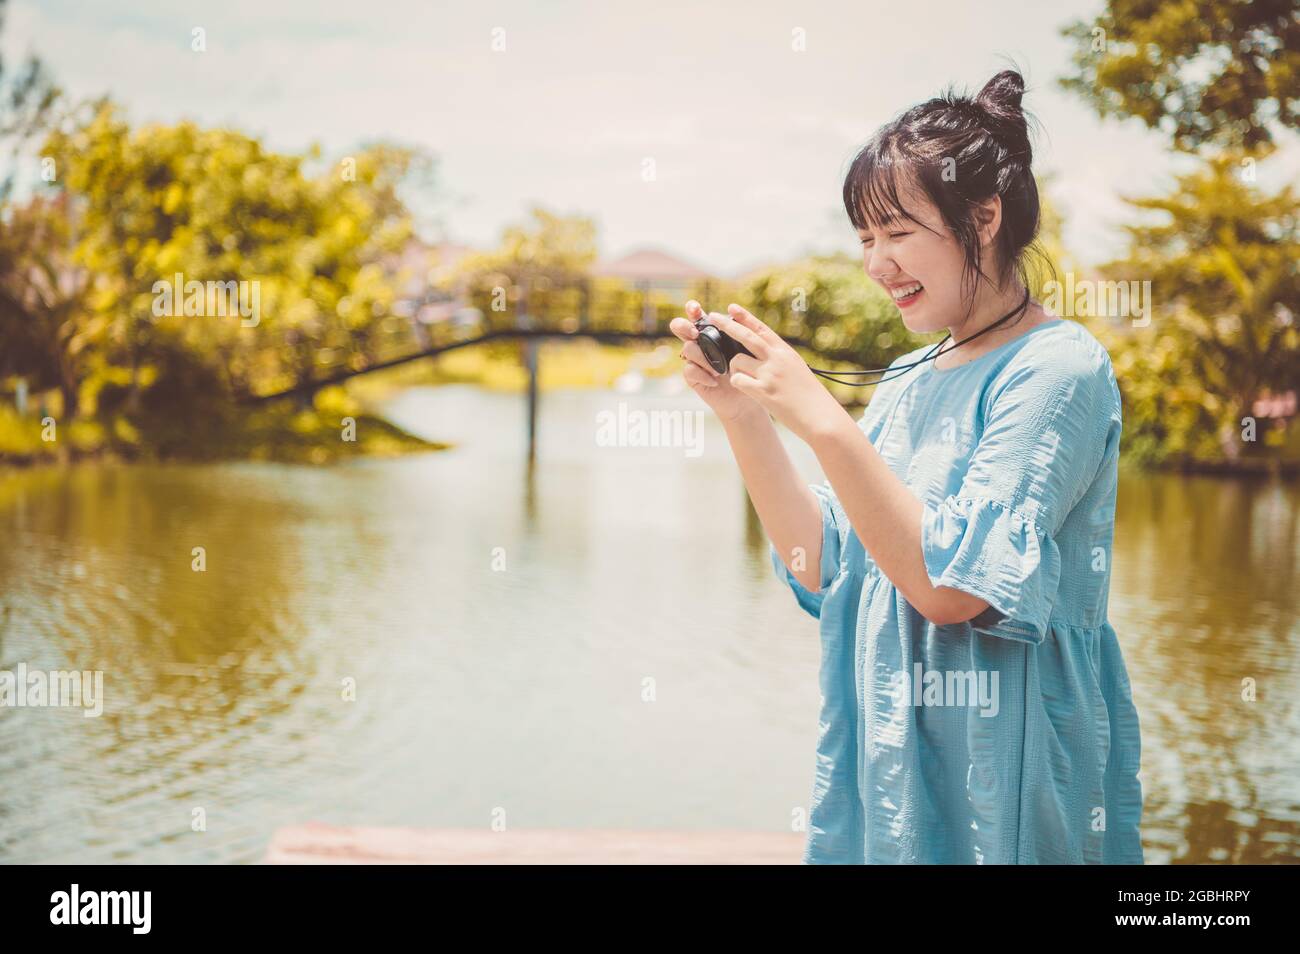 Asian Girl Feeling Happy At The Lake Stock Photo, Picture and Royalty Free  Image. Image 41066666.